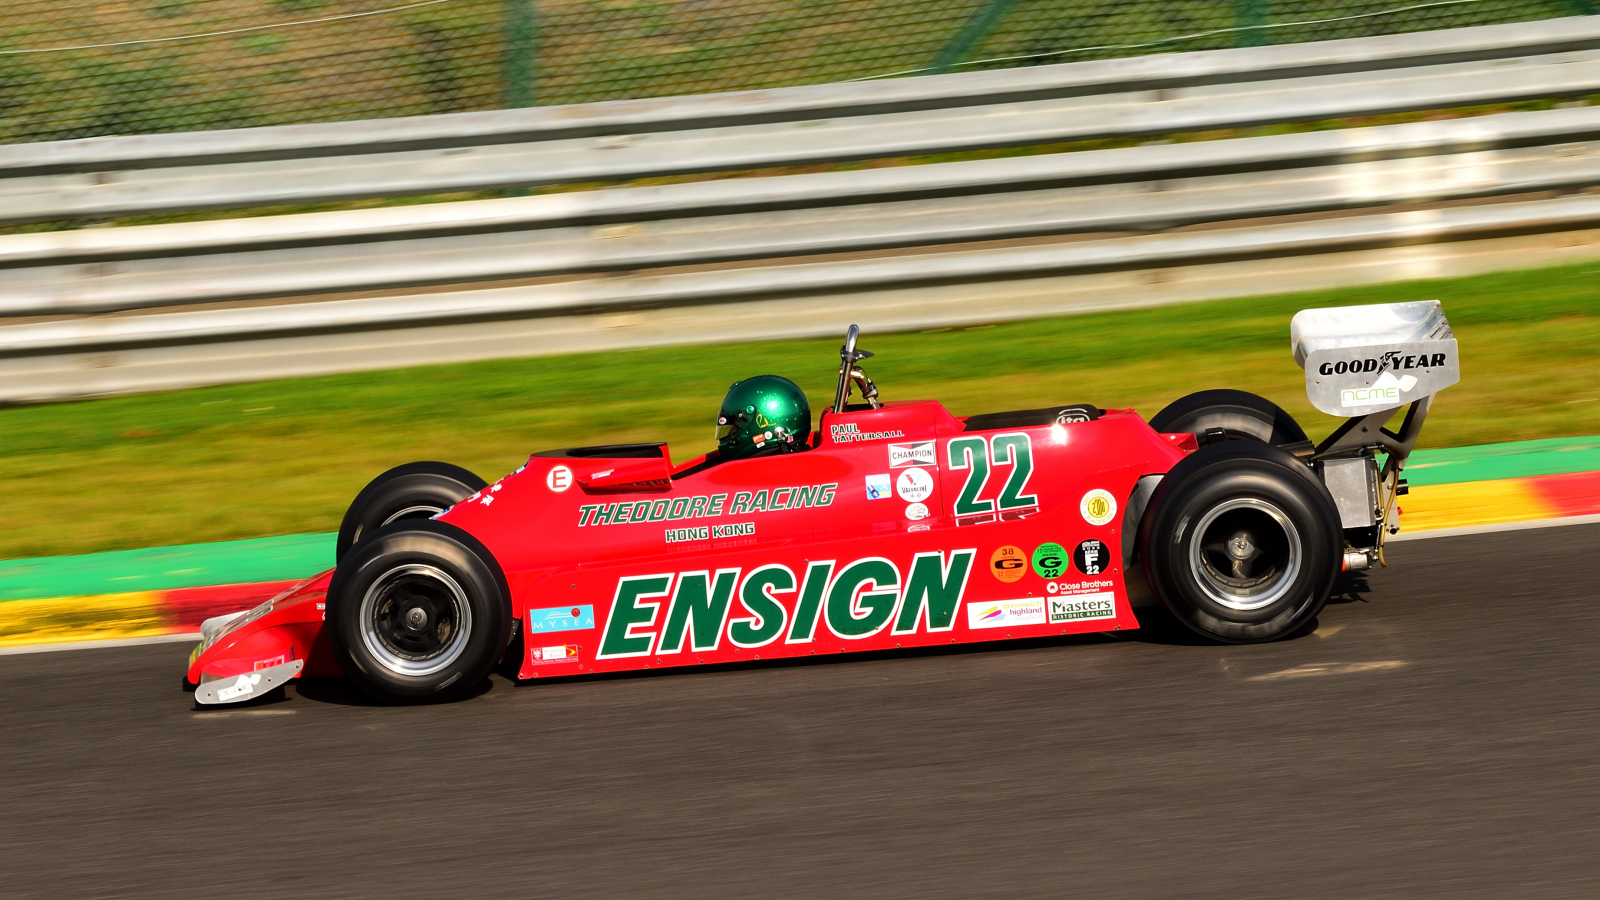 22 ENSIGN N179 (1979), Fahrer:	TATTERSALL Paul (GBR), Hier beim 6h Classic Rennen am 30.09.2023 Rahmenprogramm MASTERS RACING LEGENDS ~ F1 CARS 1966-1985in Spa Francorchamps 